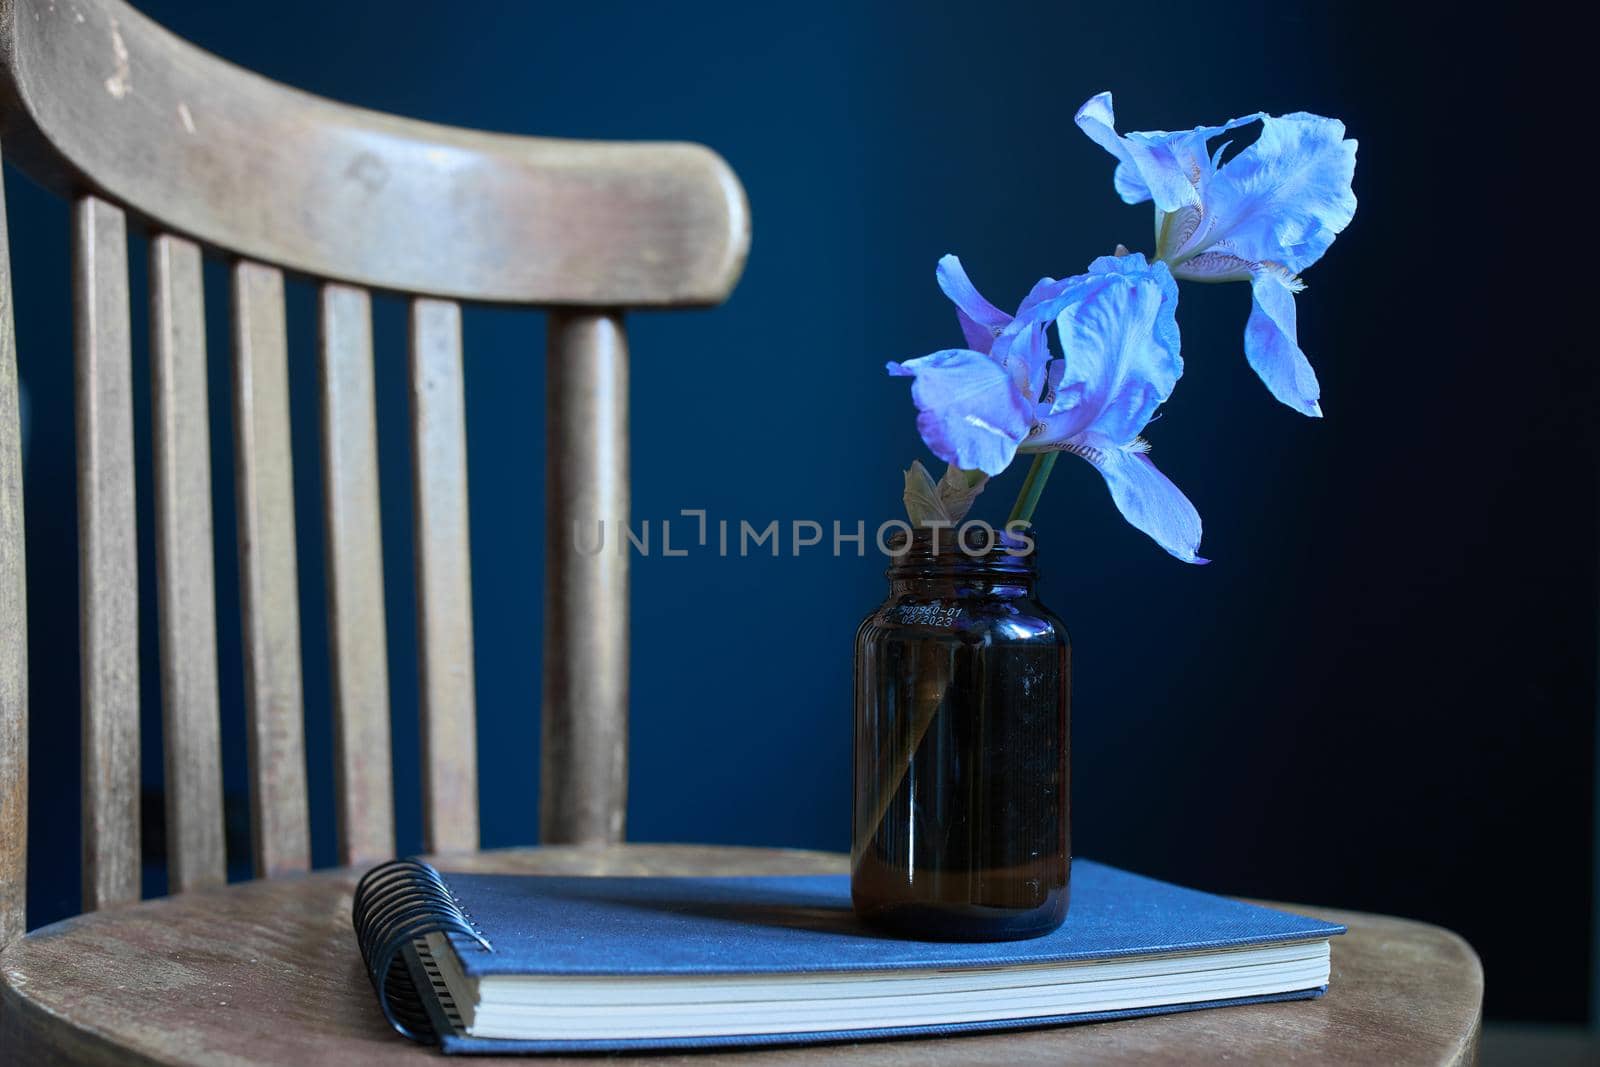 Two blue iris flowers are the bottle on a black notebook on a wooden Viennese vintage chair by elenarostunova